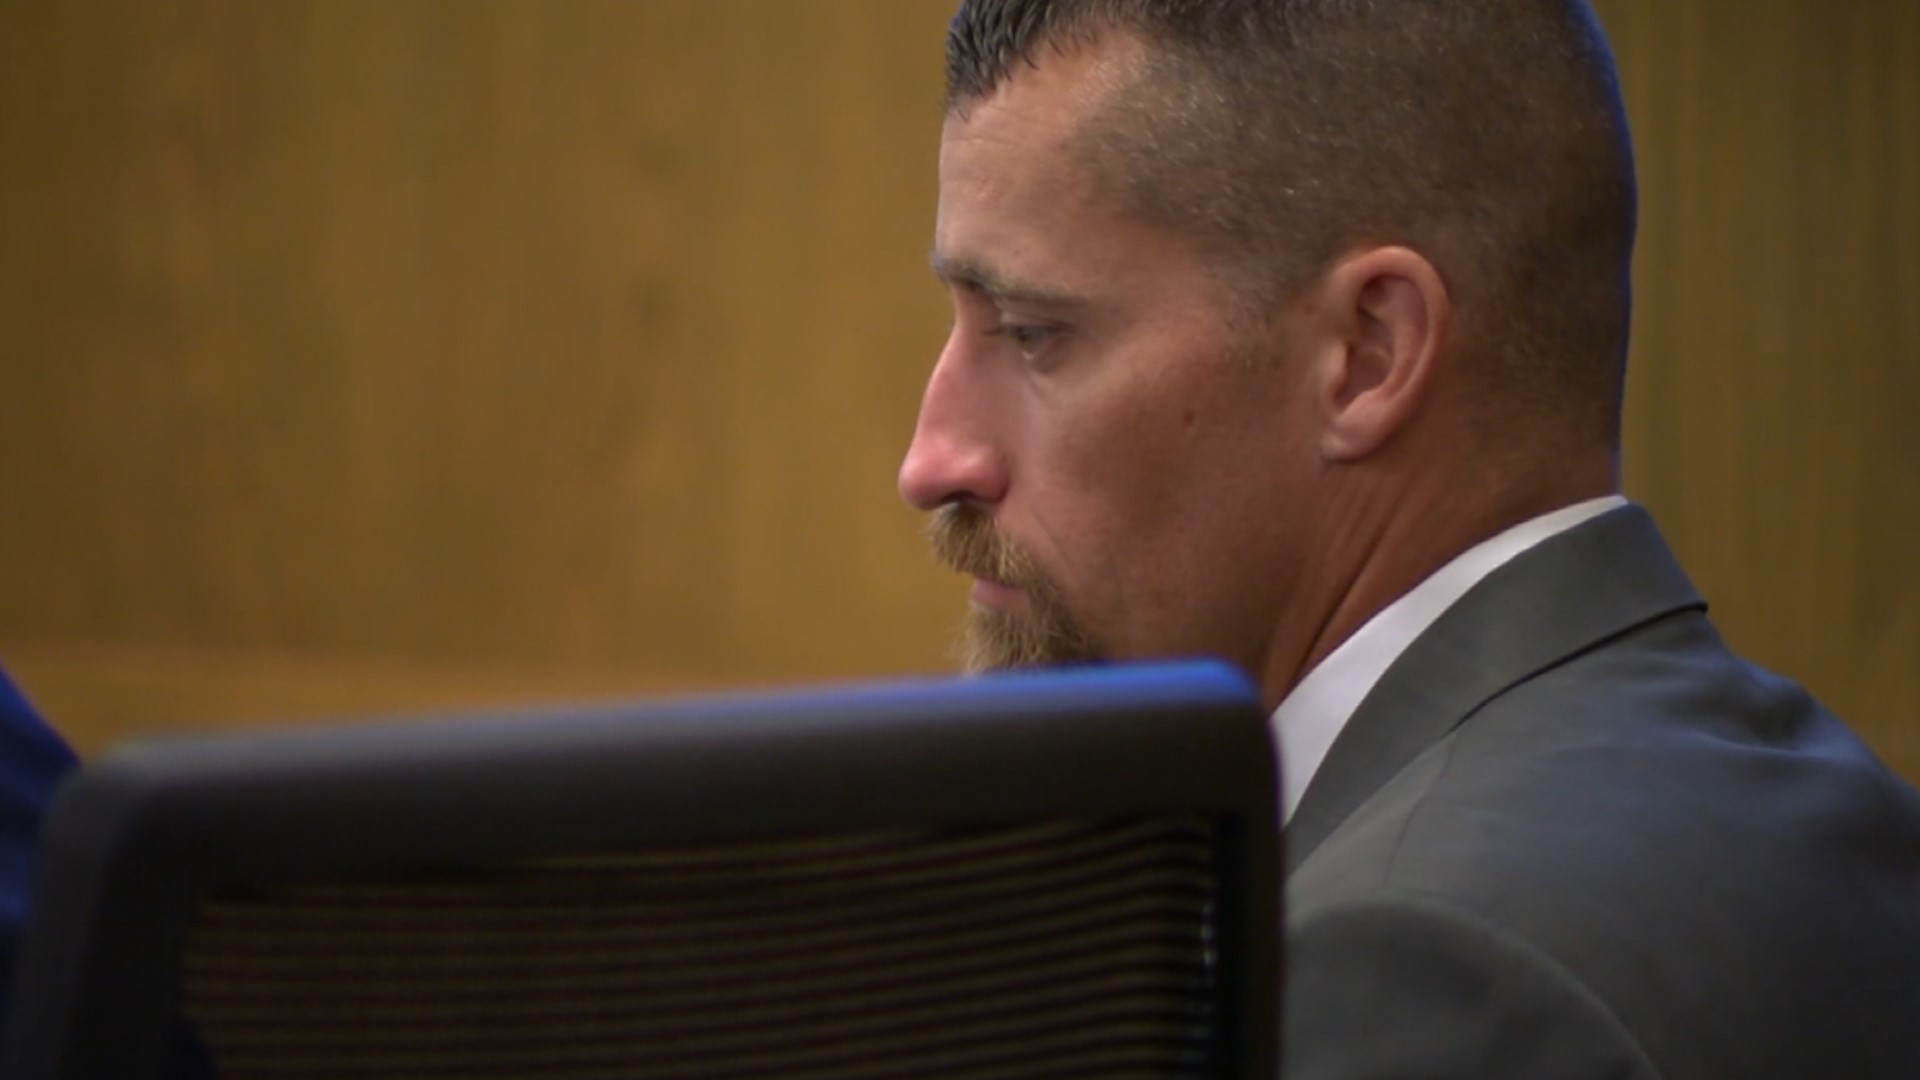 Former police officer Nathan Nash is accused of the rape of two women back in 2019. He now begins his trial in court today.